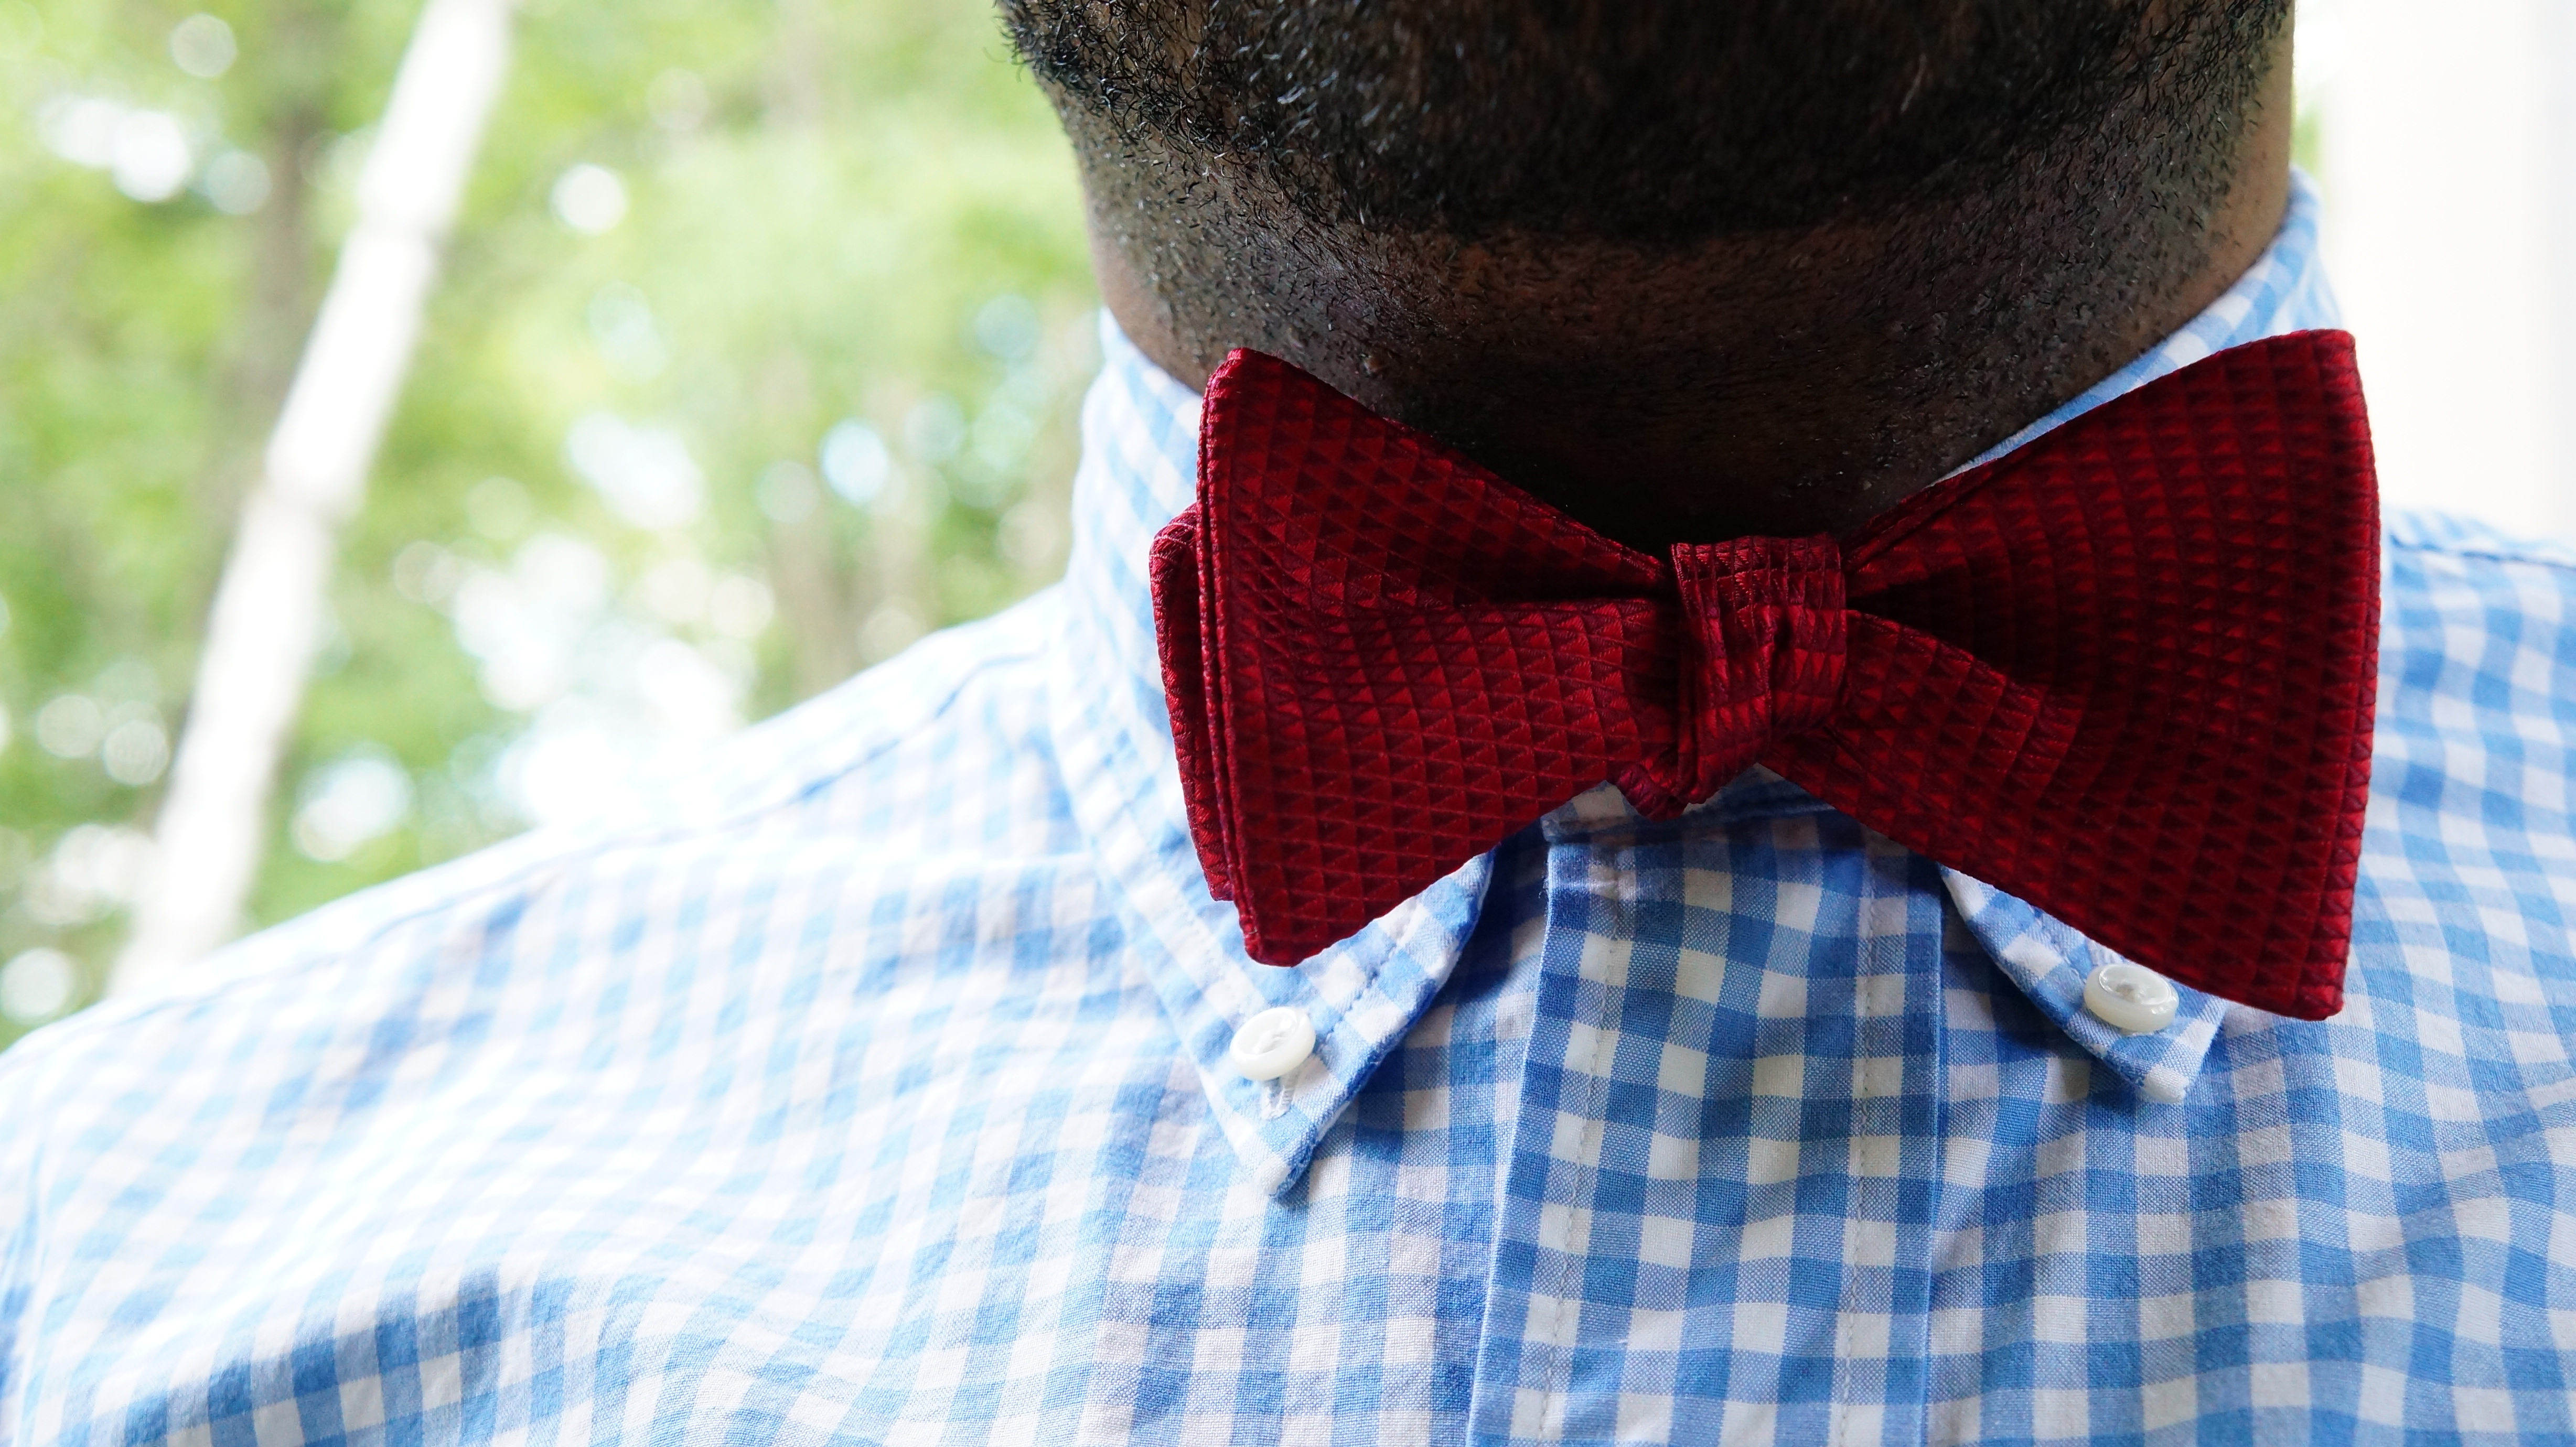 Headline for The Bow Tie Naming Rights Contest (Red w Sawtooth pattern)